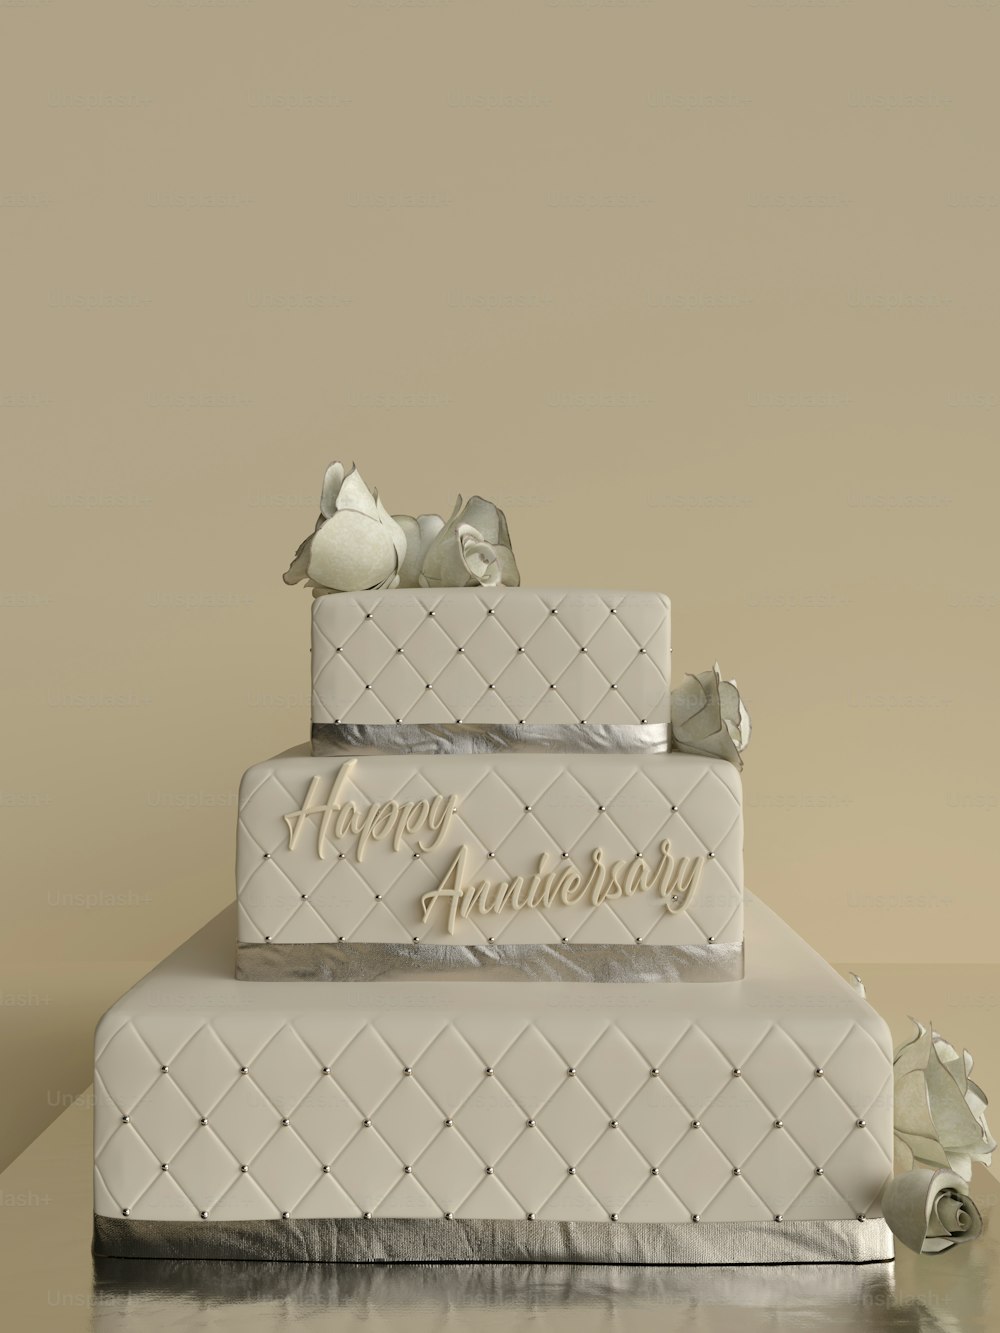 a three tiered cake with a happy anniversary sign on it